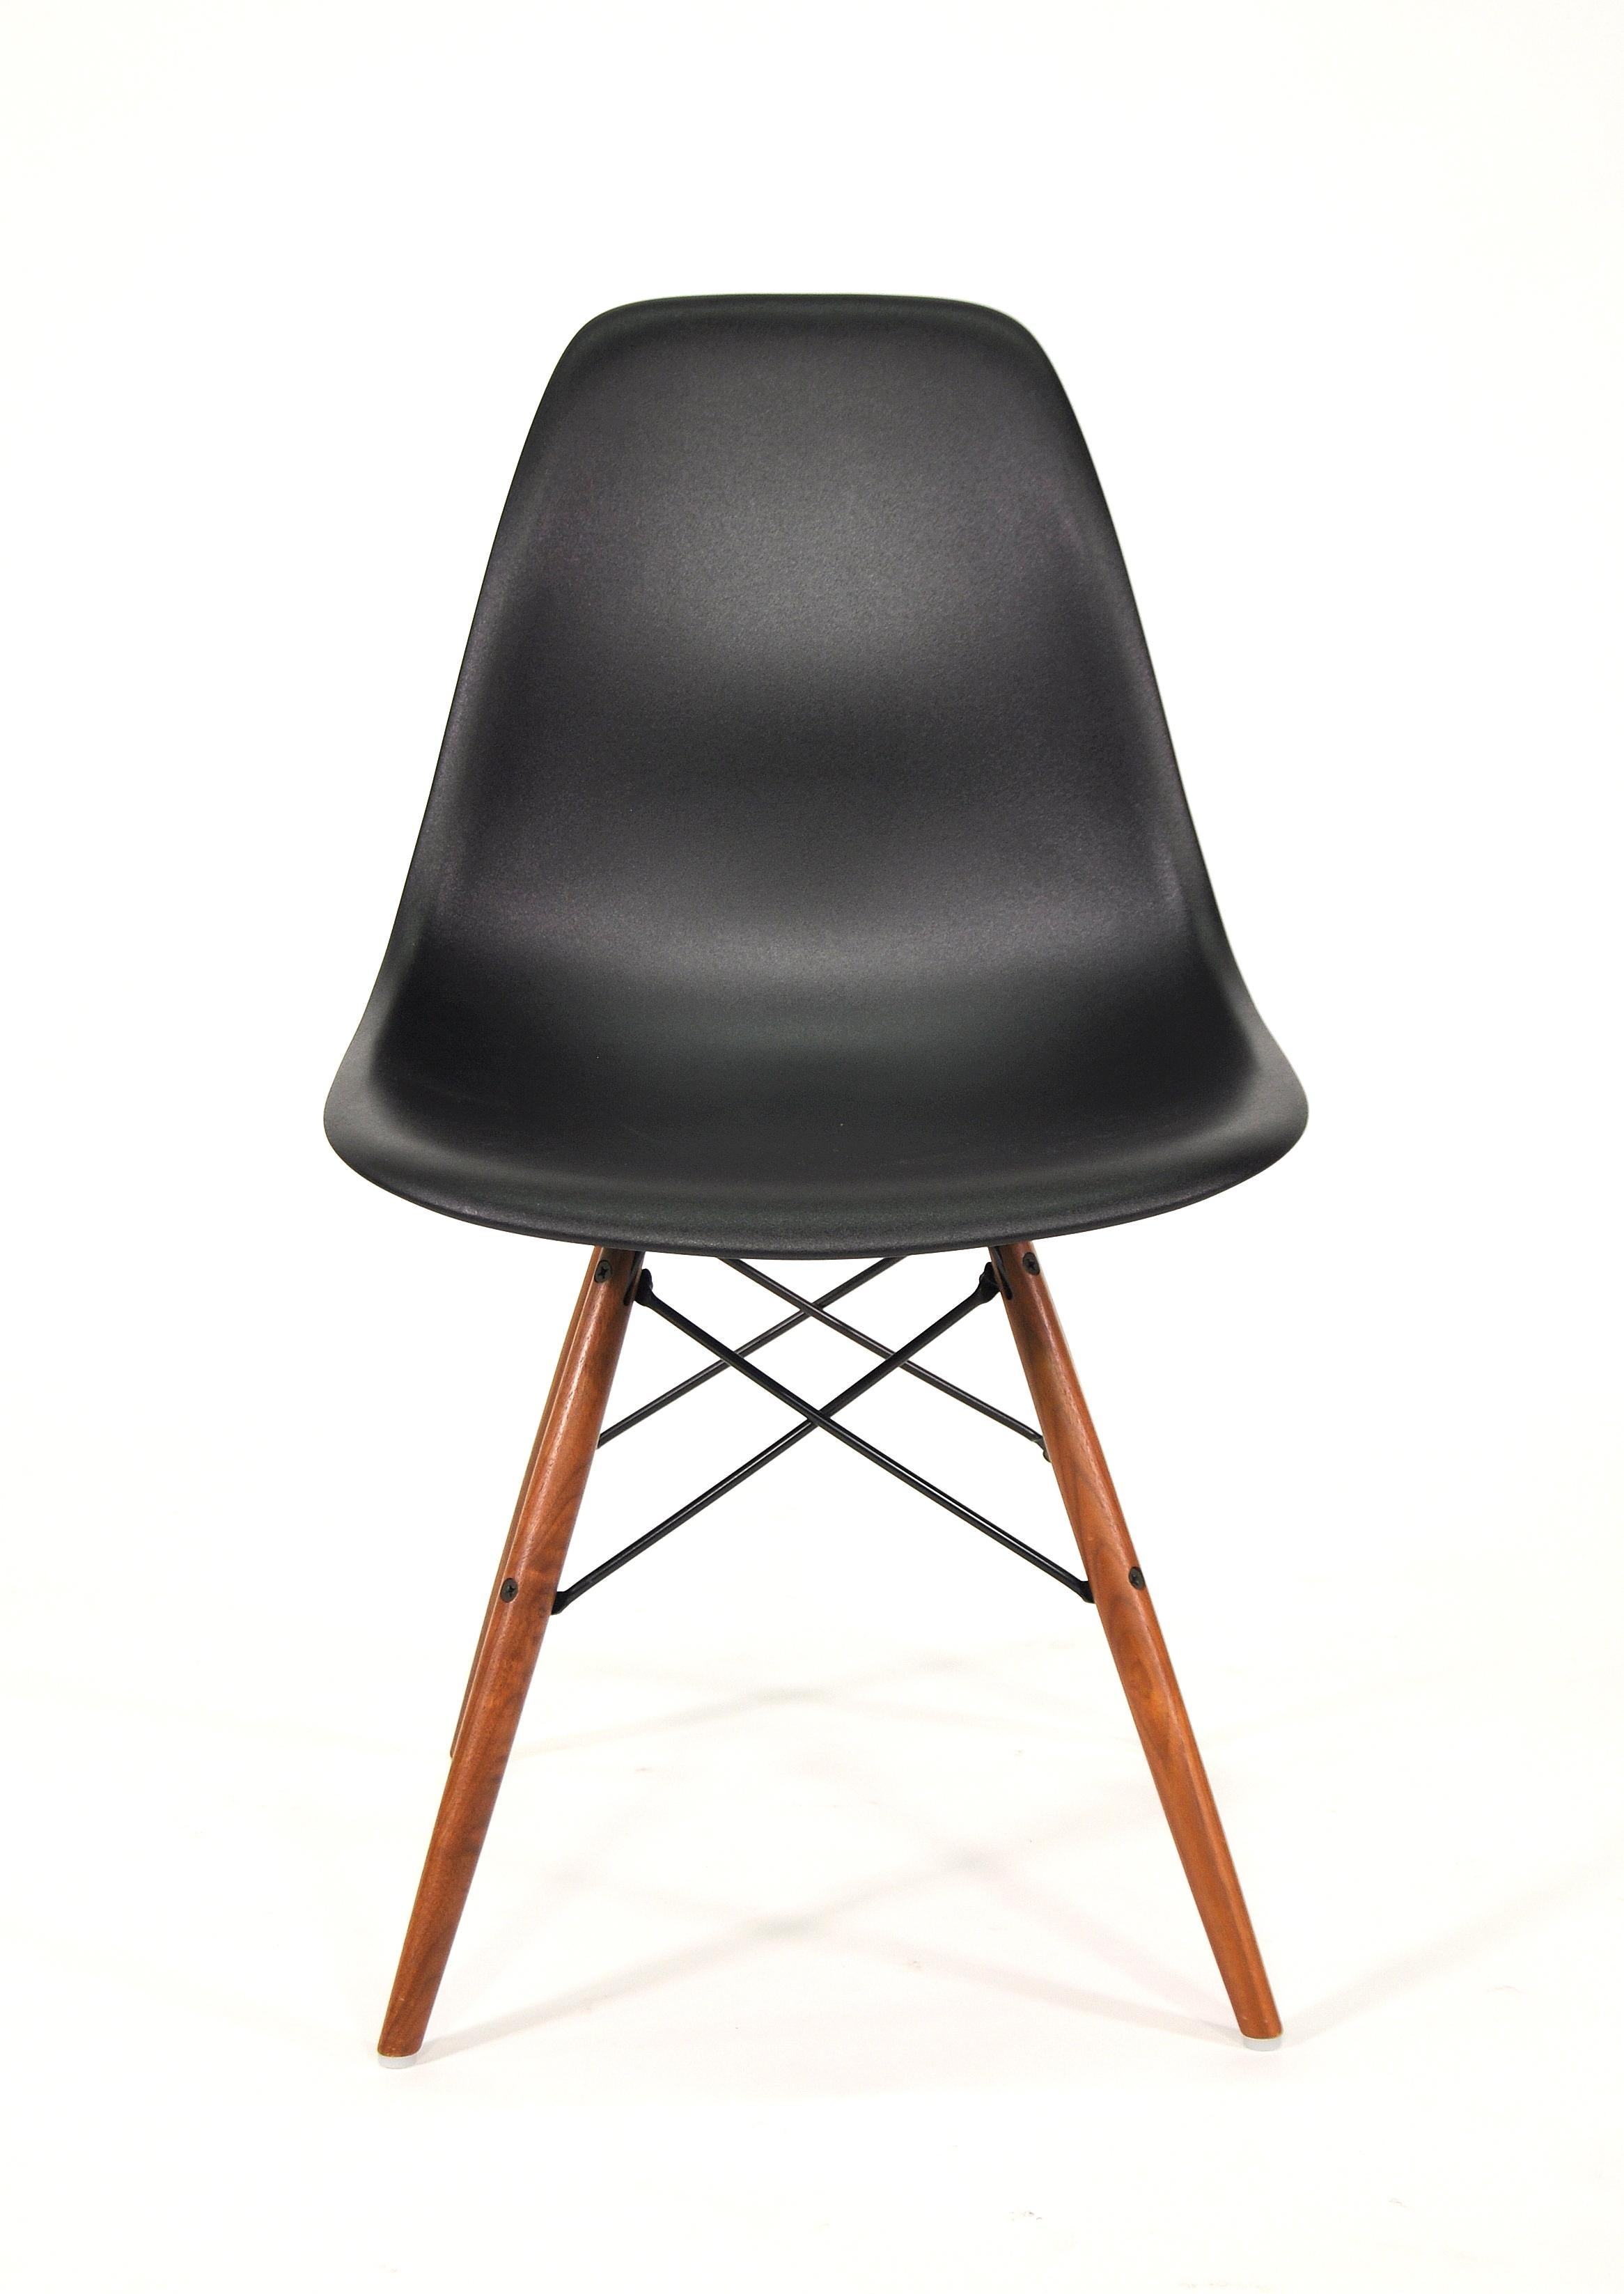 Four Eames Herman Miller Black DSW Dining Chairs For Sale 11